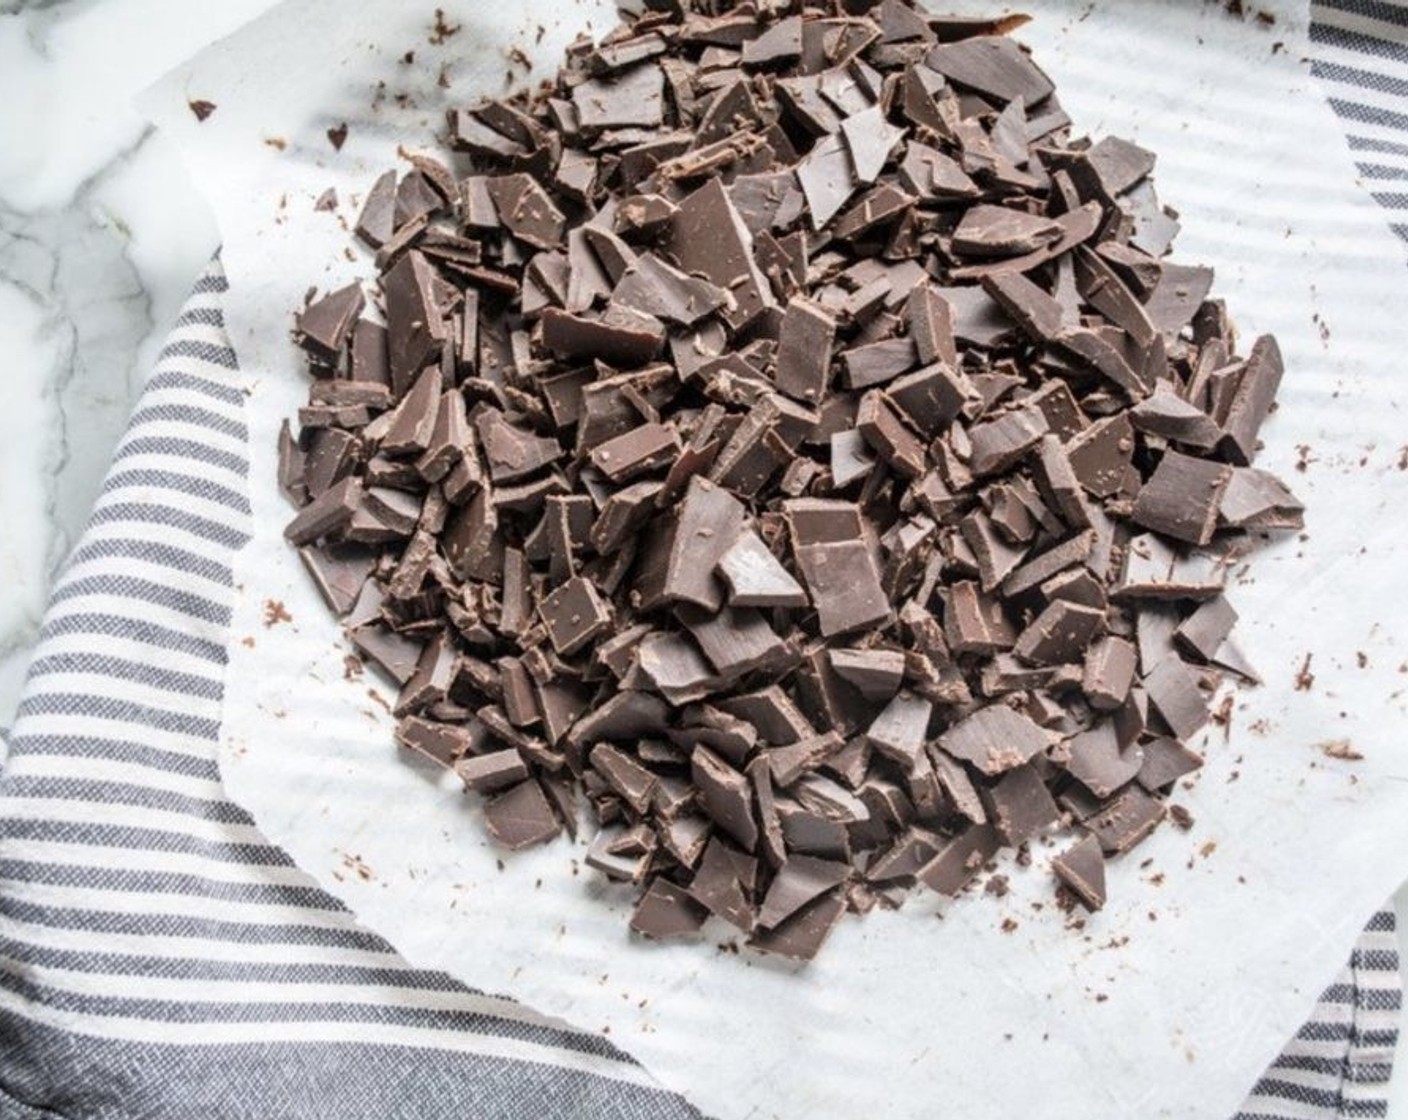 step 5 Once the chocolate has fully hardened, remove and cut into small chunks. Store in freezer and use in place of chocolate chips!